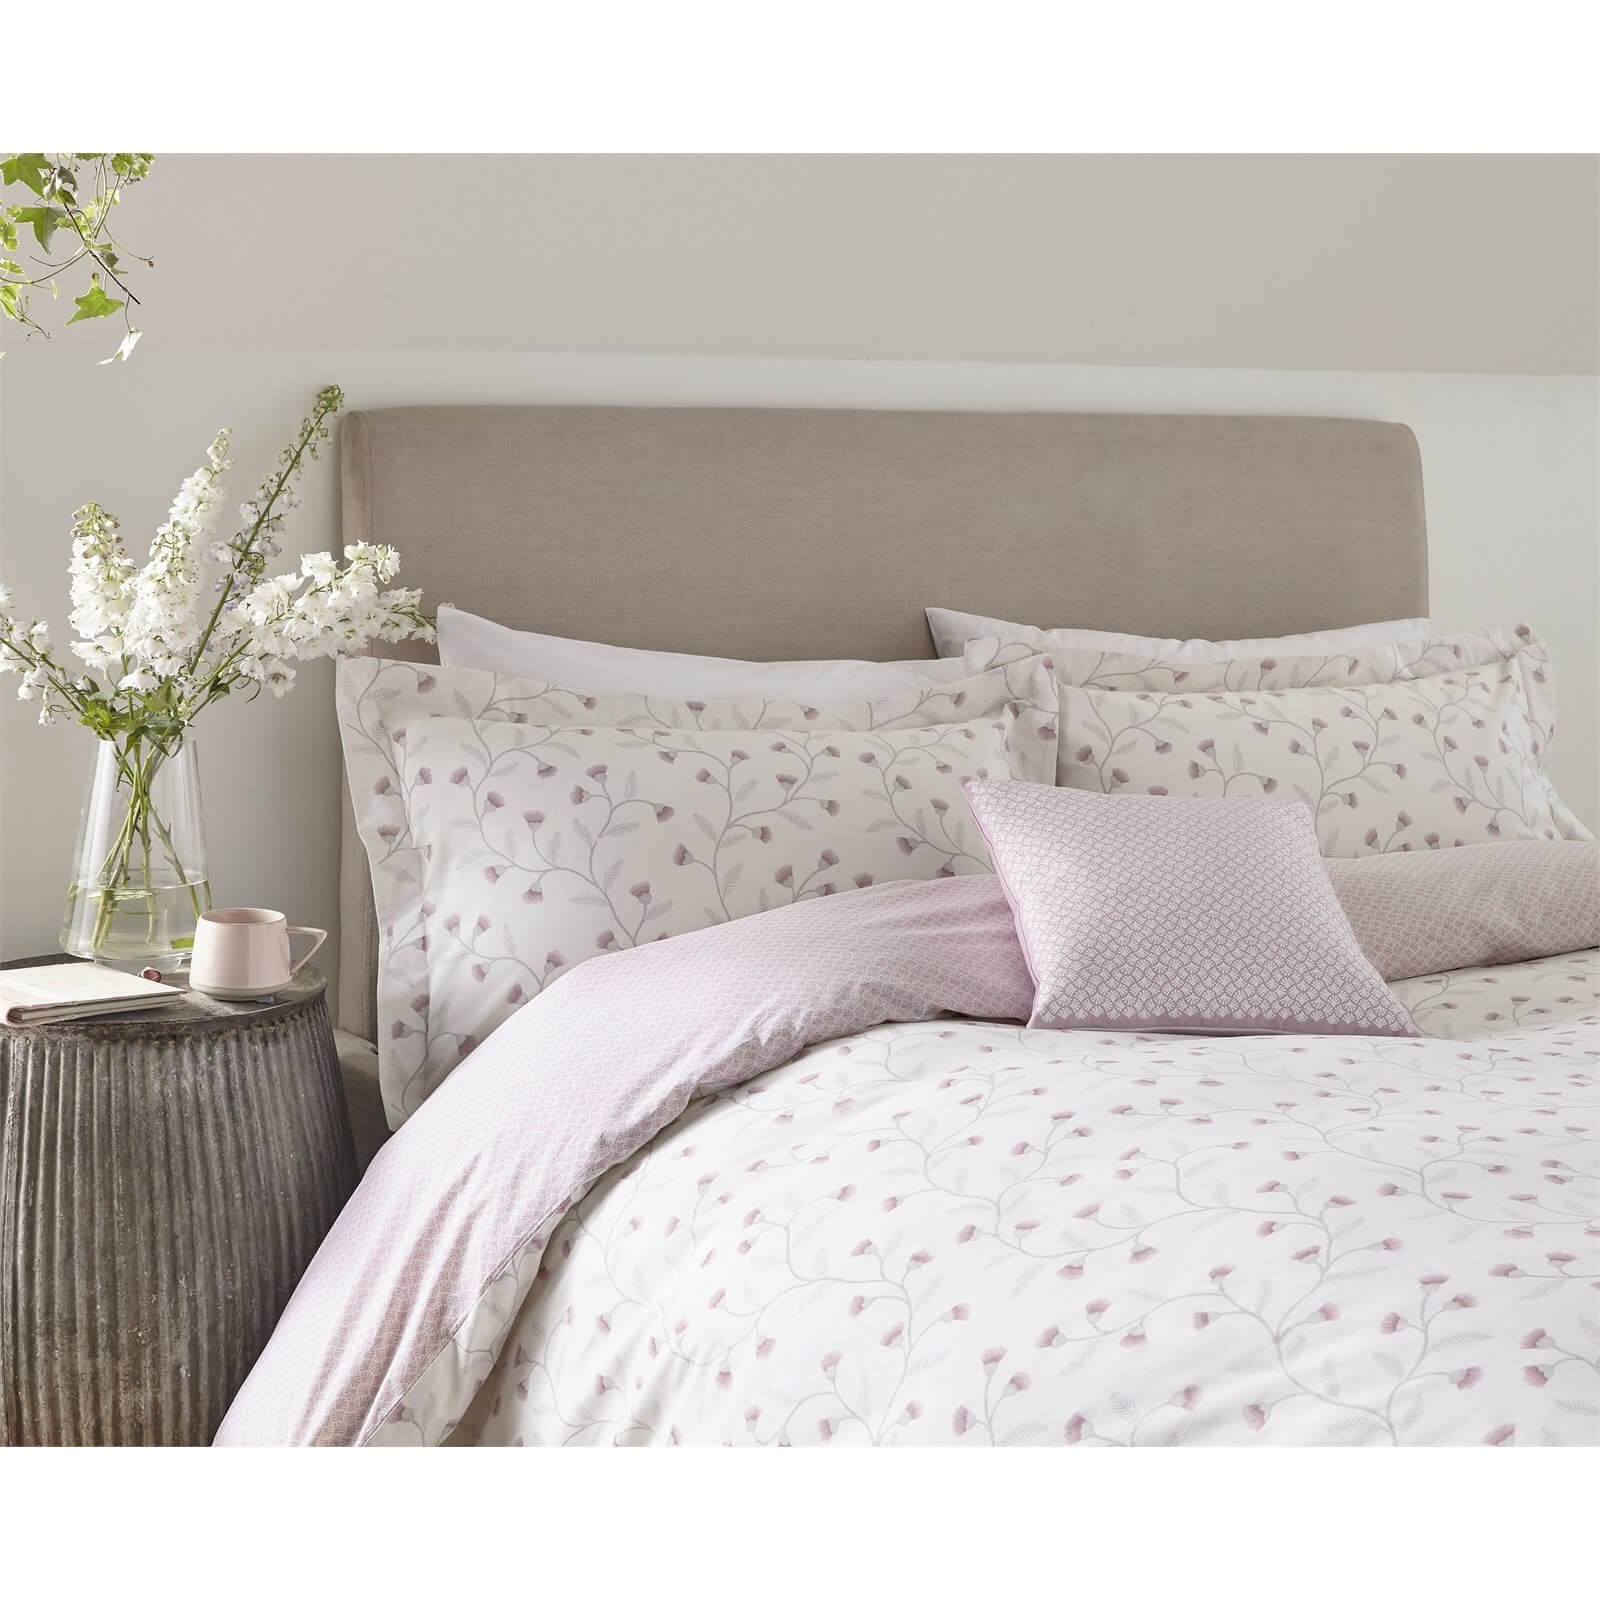 Sanderson Home Everly Duvet Cover Set - Double - Heather